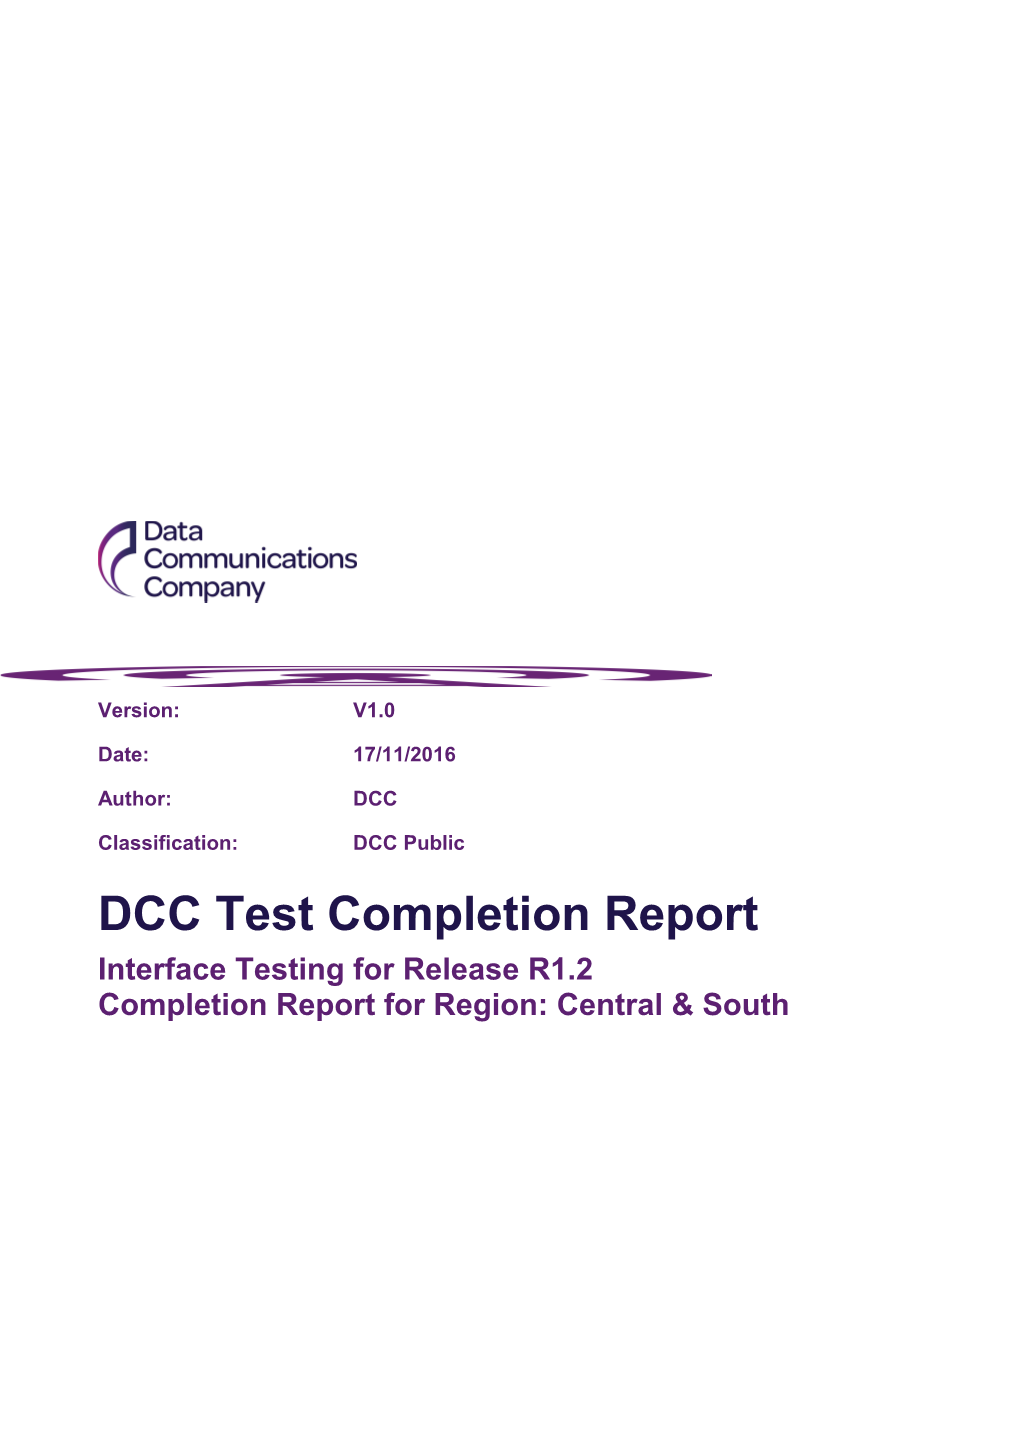 DCC Test Completion Report